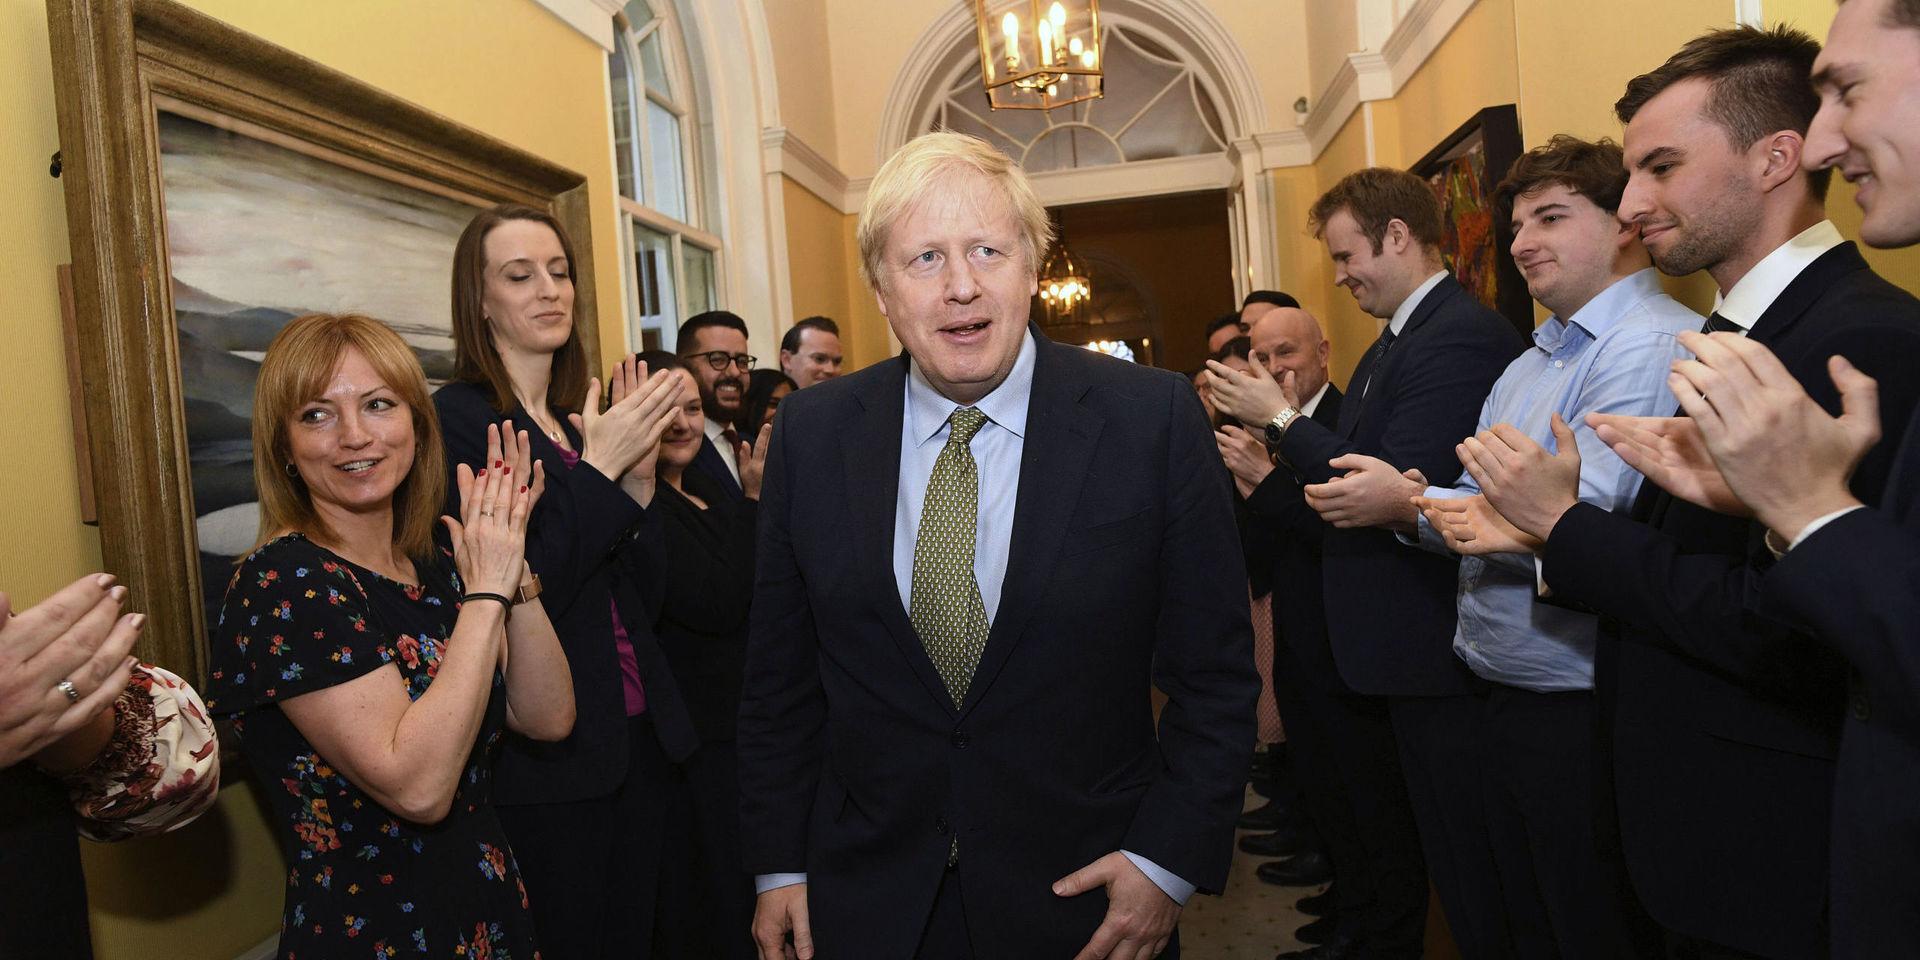 Britain&apos;s Prime Minister Boris Johnson is greeted by staff as he returns to 10 Downing Street, London, after meeting Queen Elizabeth II at Buckingham Palace and accepting her invitation to form a new government, Friday Dec. 13, 2019.  Boris Johnson led his Conservative Party to a landslide victory in Britain’s election that was dominated by Brexit. (Stefan Rousseau/PA via AP)  LBJ121